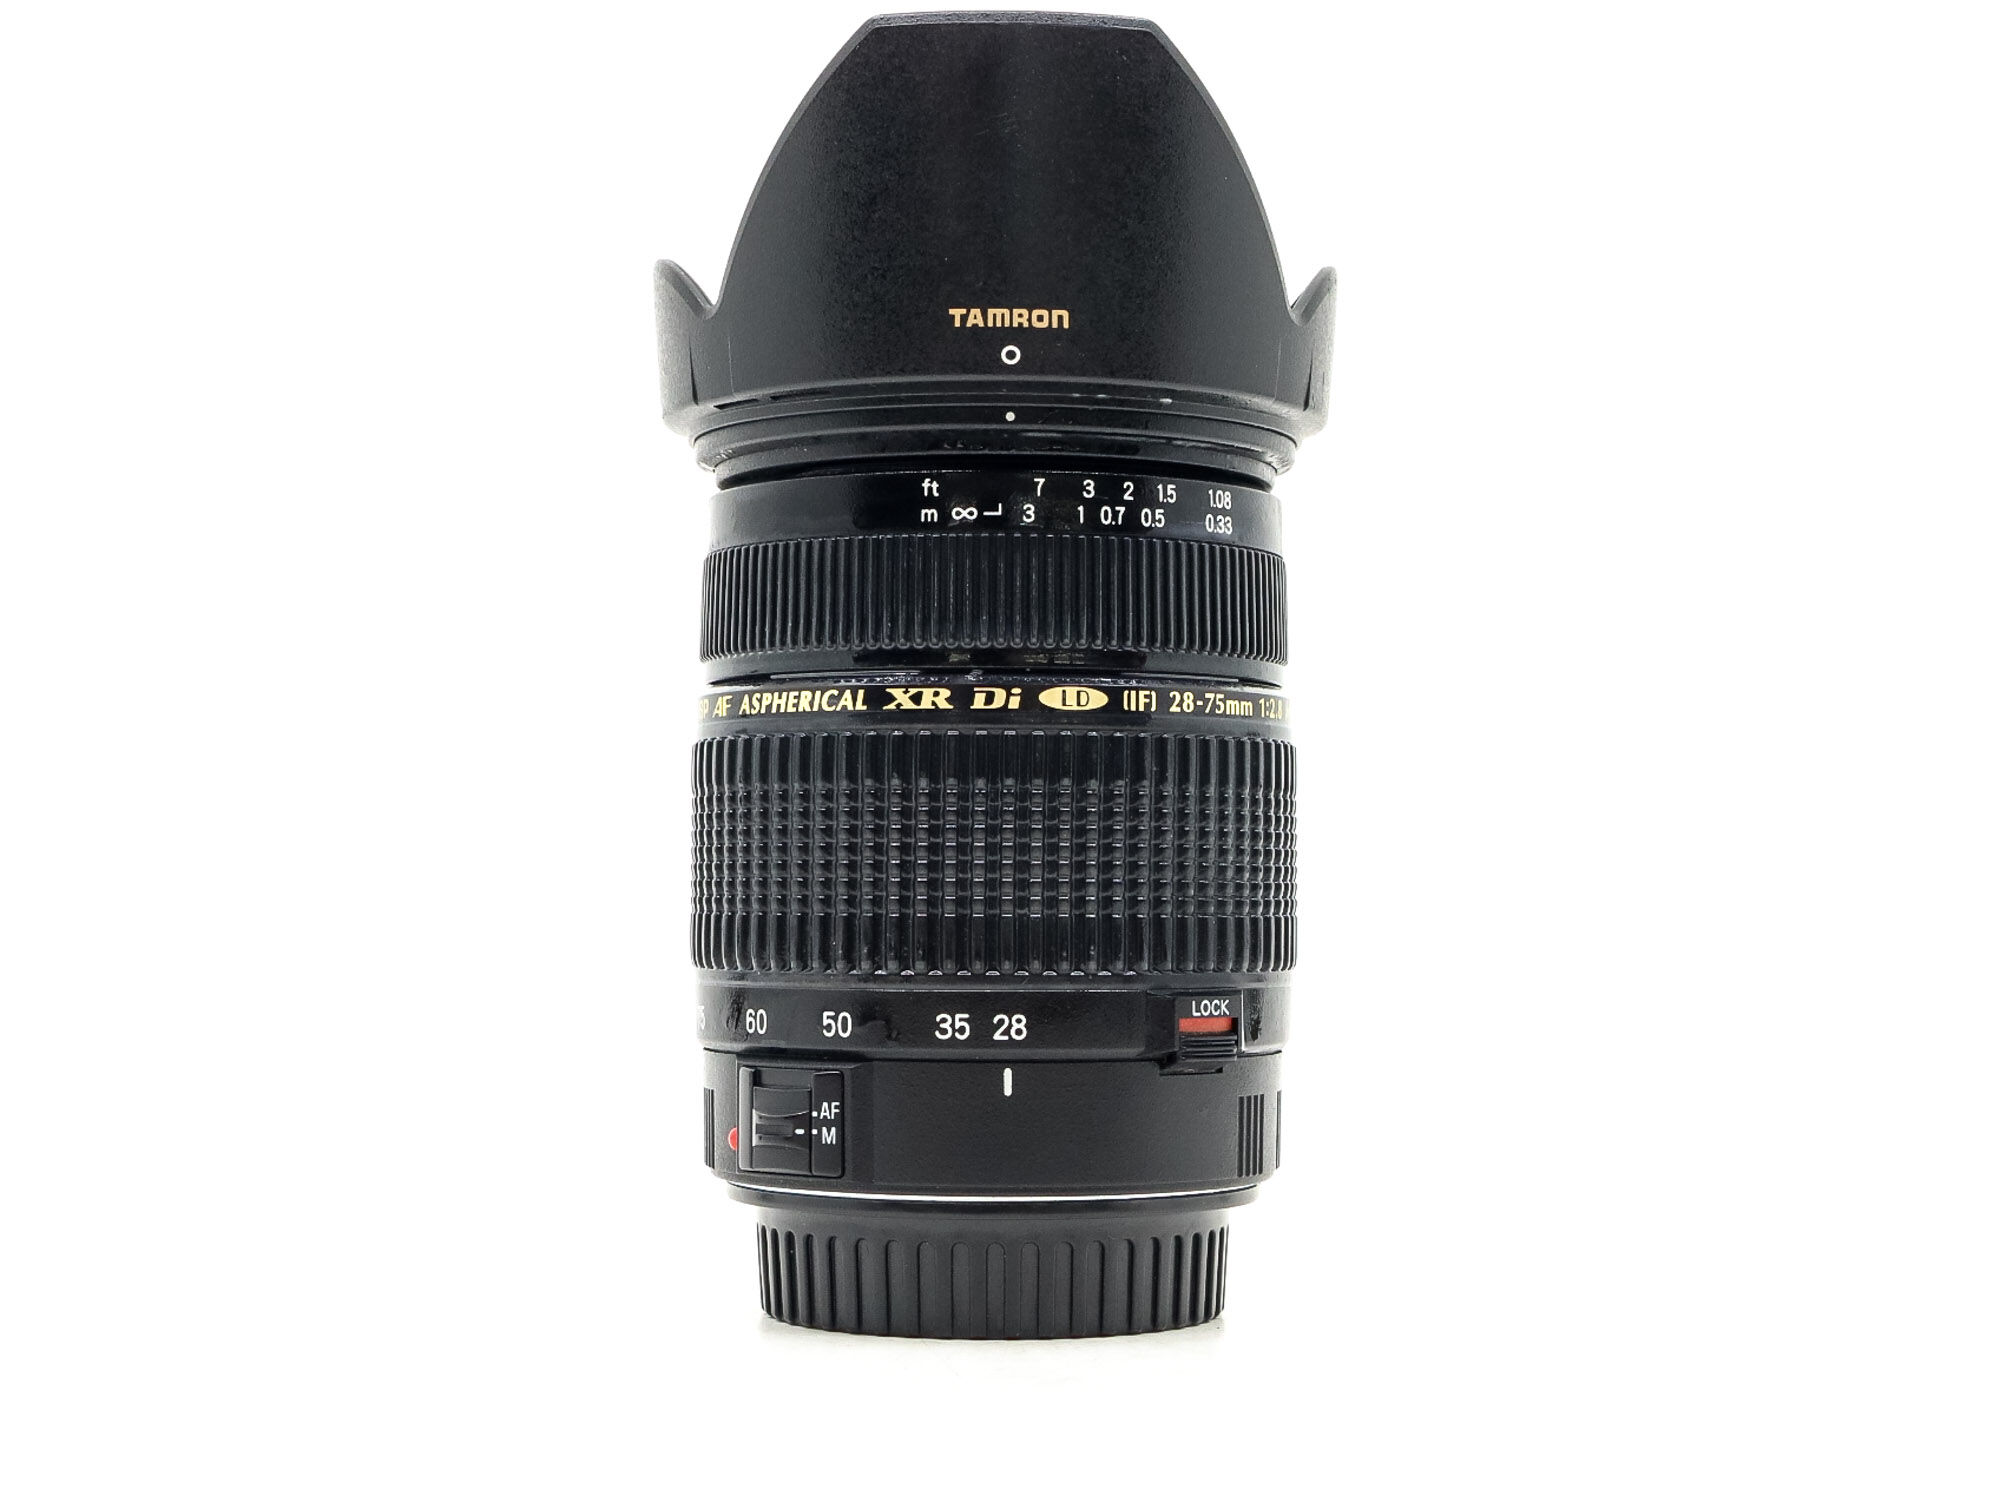 Tamron SP AF 28-75mm f/2.8 XR Di LD Aspherical (IF) Macro Canon EF Fit (Condition: Good)